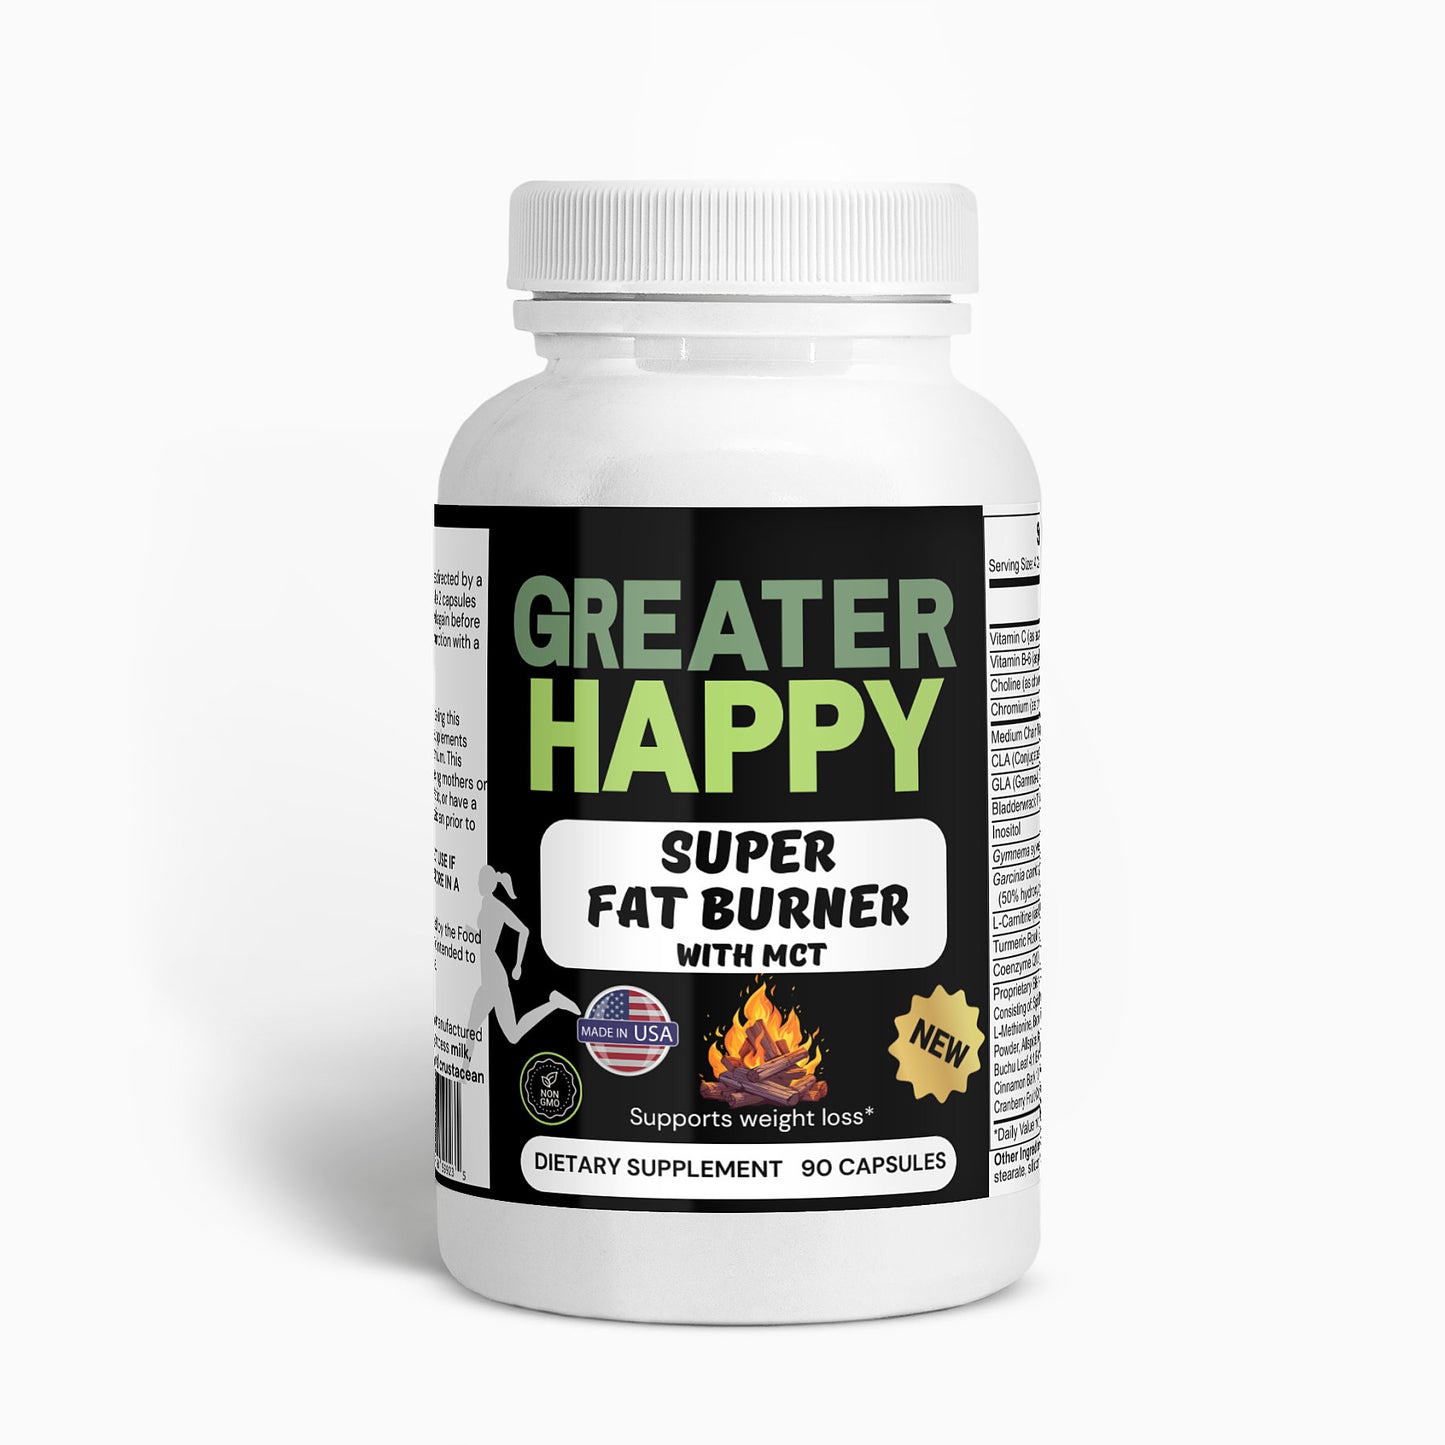 Greater Happy Super Fat Burner with MCT